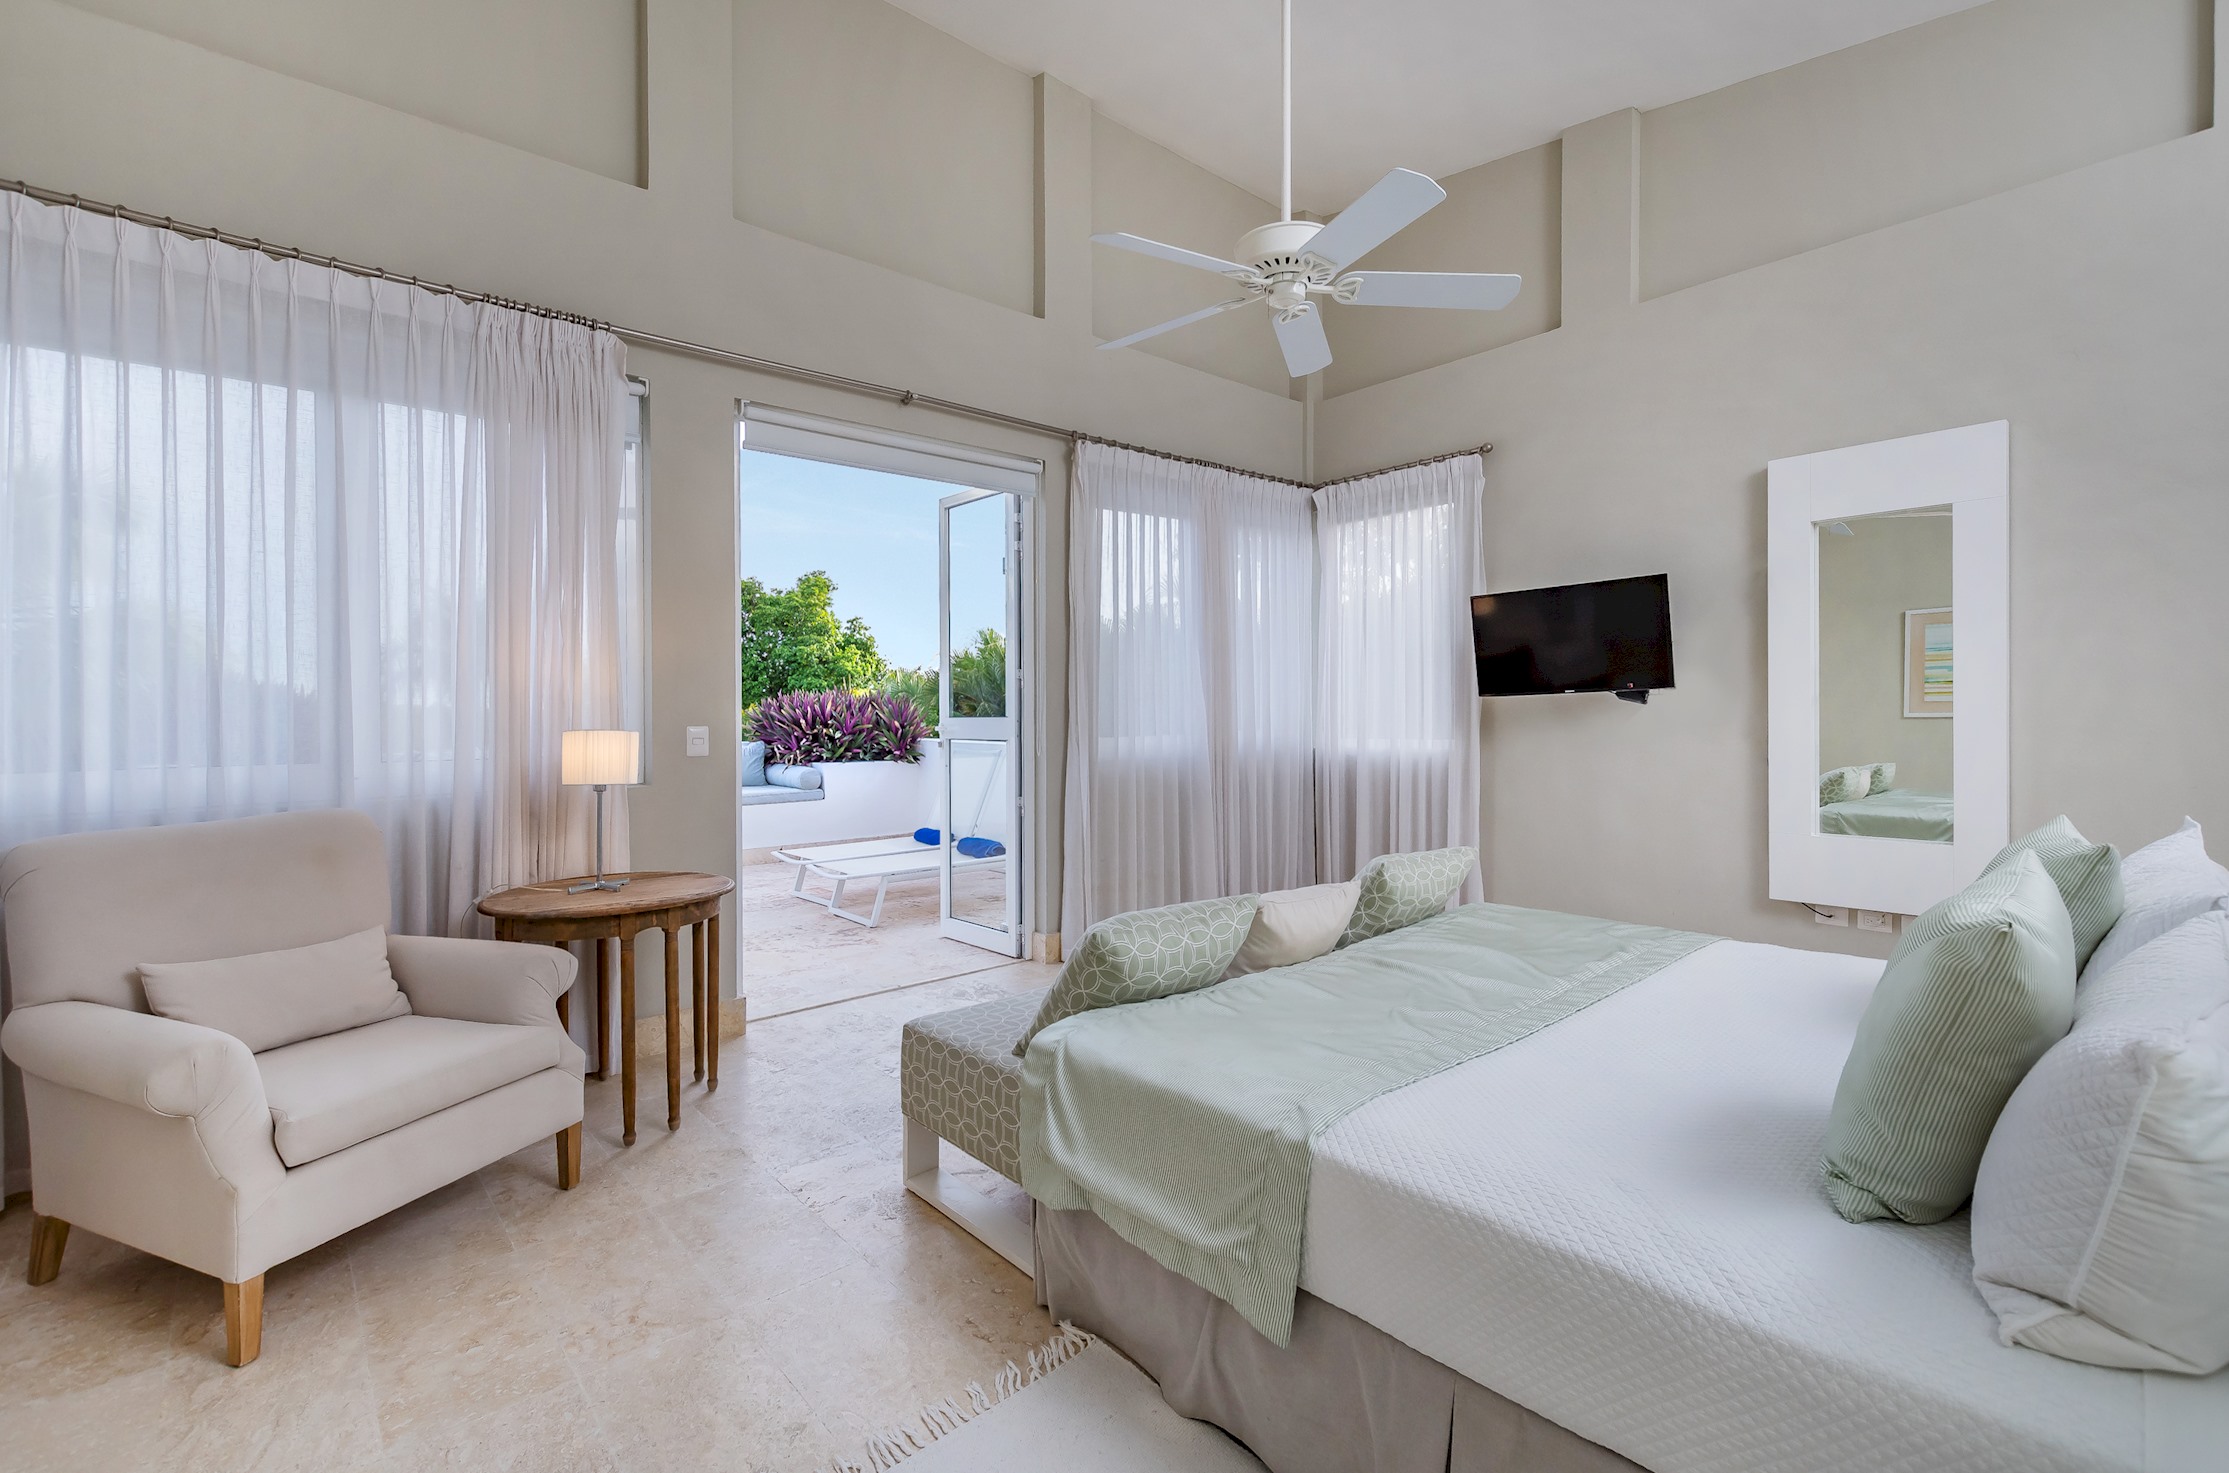 Luxury villa at Puntacana Resort & Club – with pool, golf carts, butler and maid 2